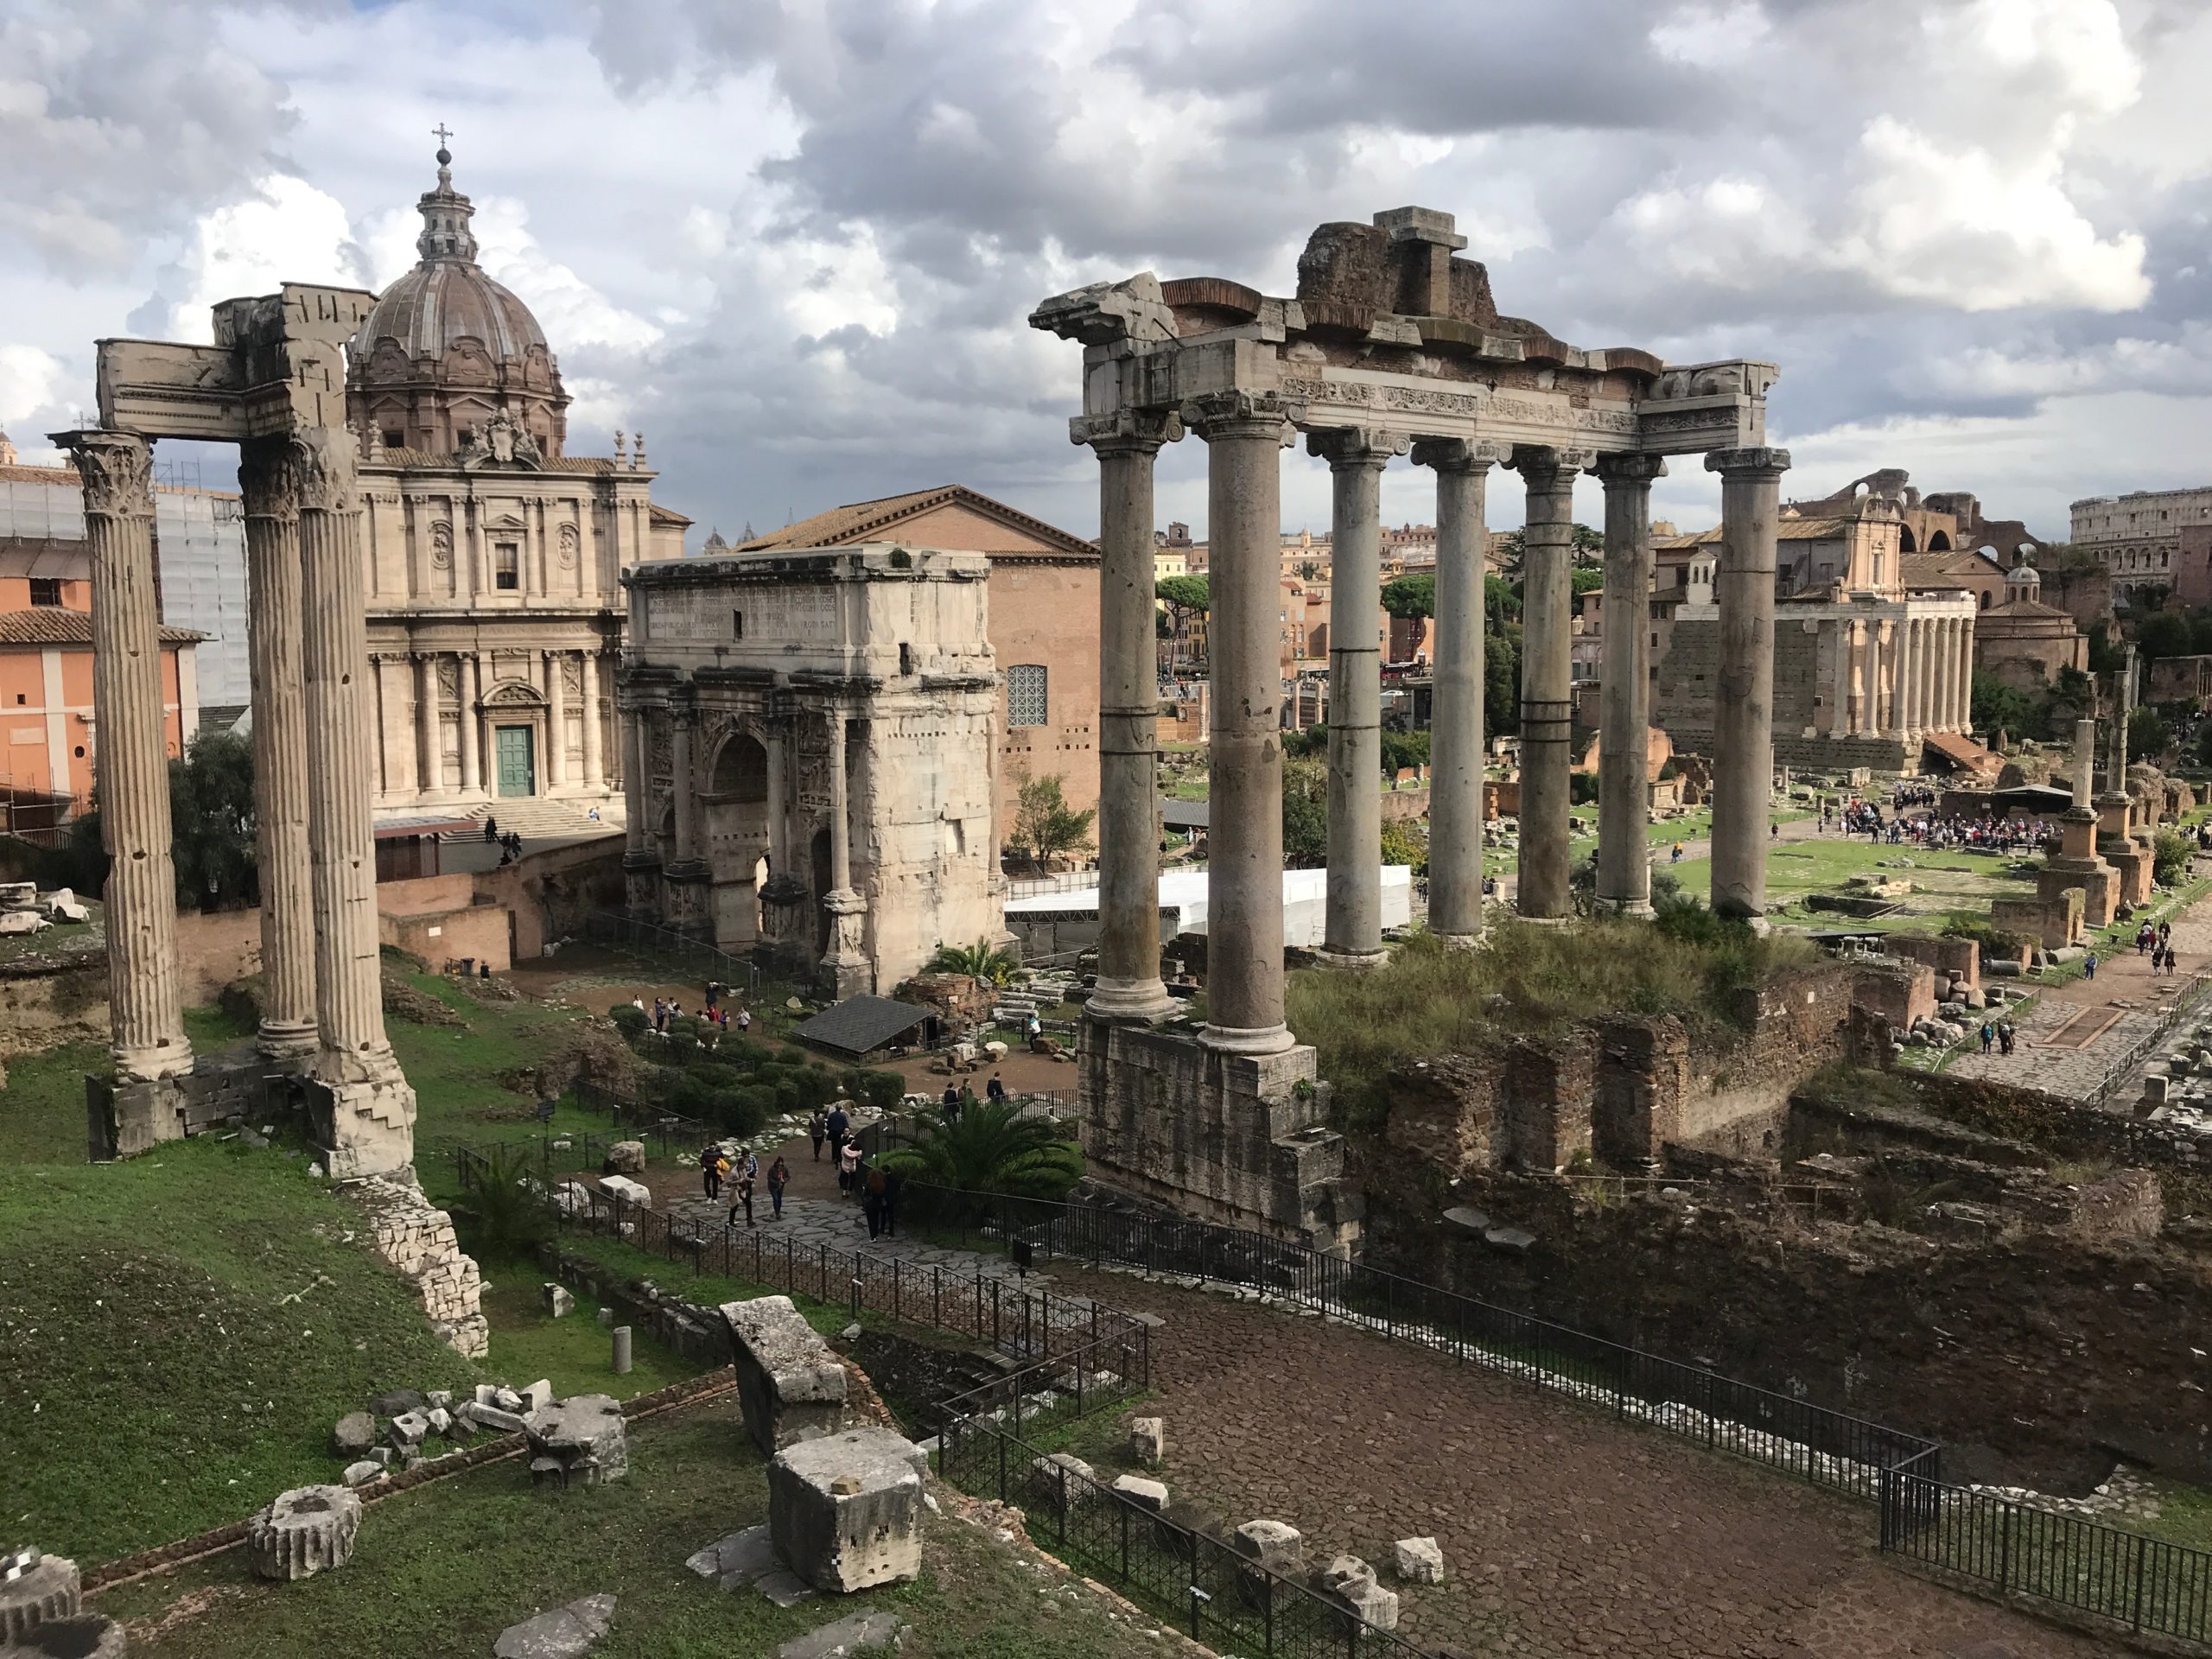 Introduction to Ancient Rome